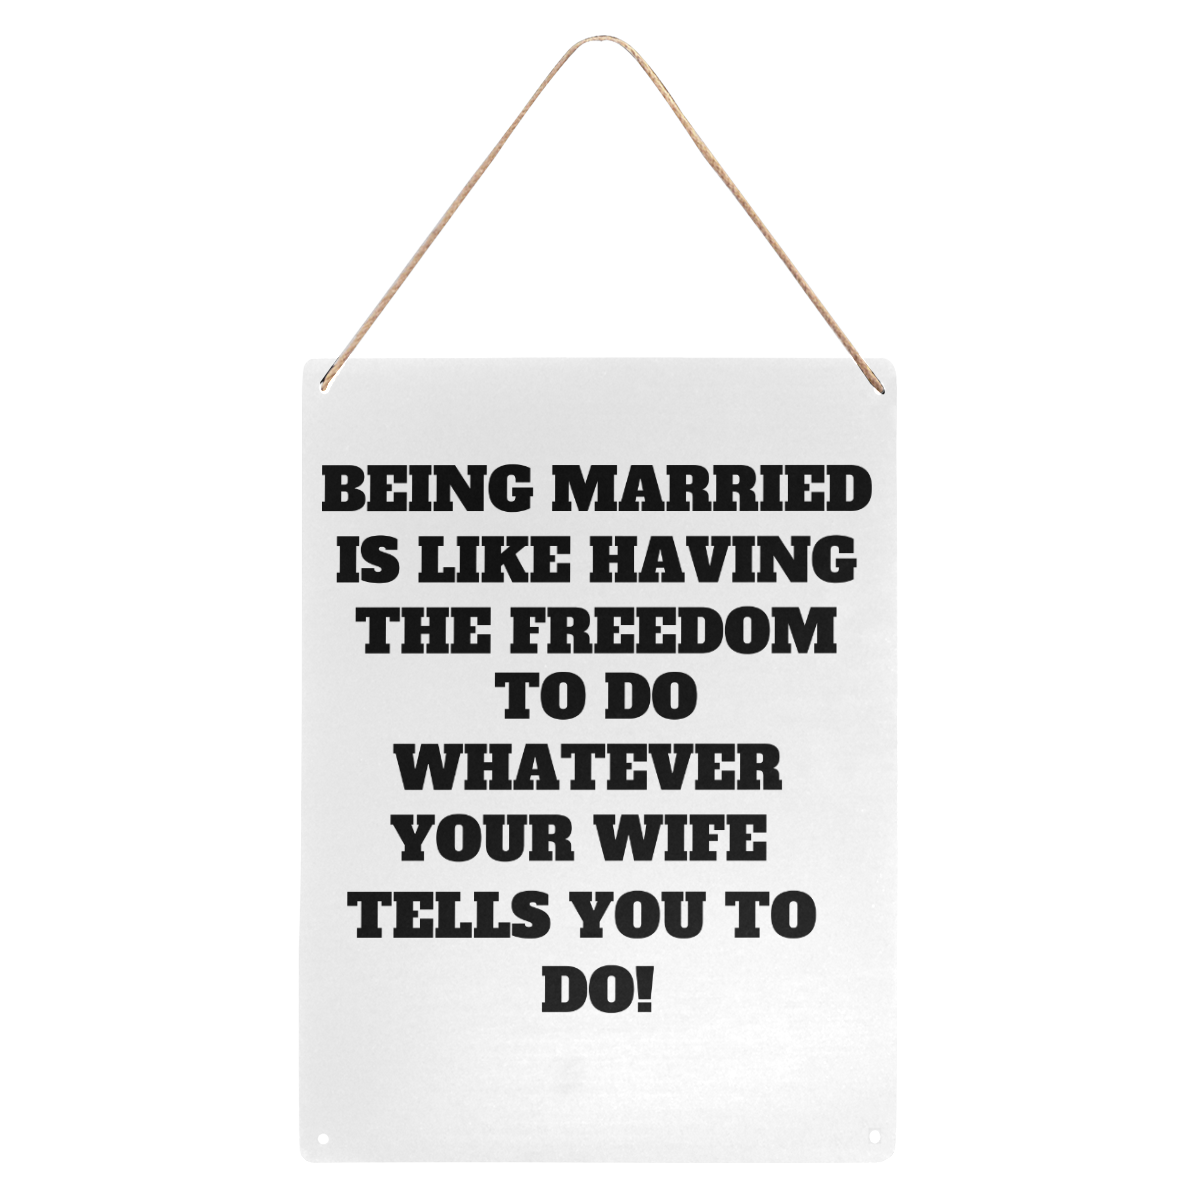 Being Married is like having the freedom to do whatever your wife tells you to do Metal Tin Sign 12"x16"